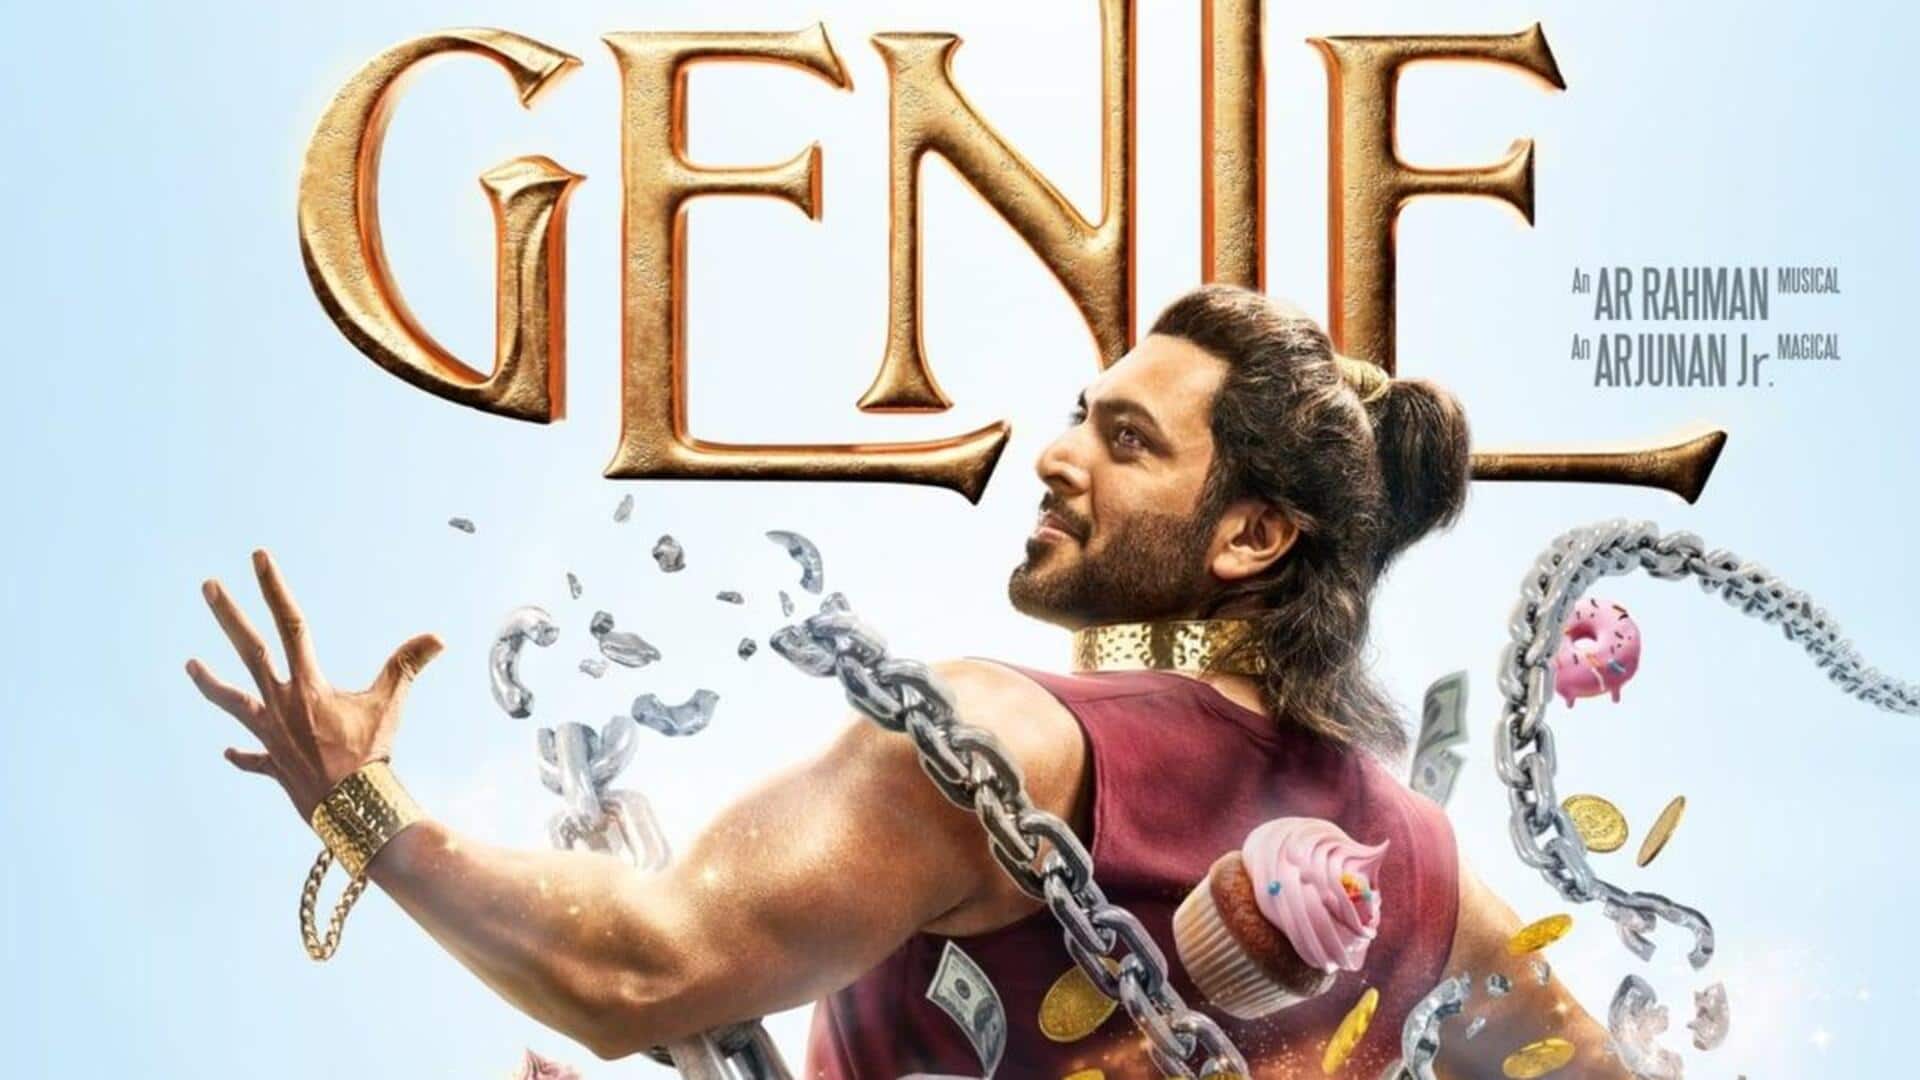 Jayam Ravi's first look from fantasy drama 'Genie' out!